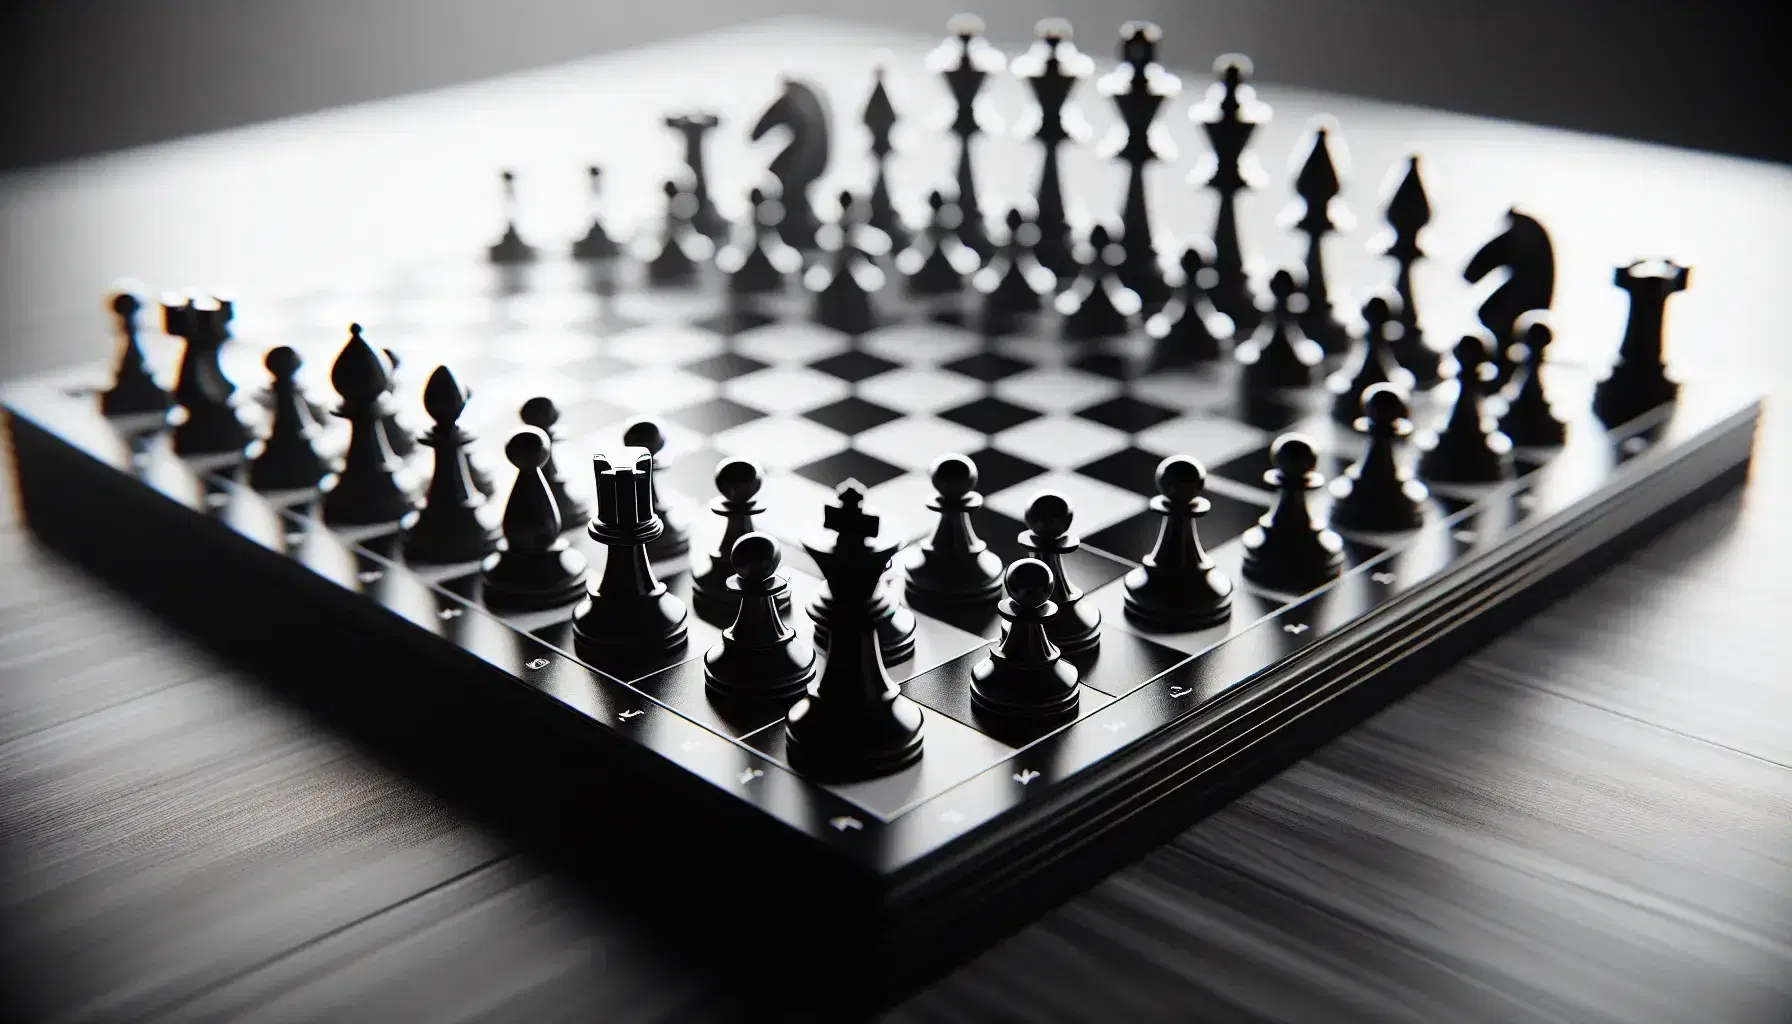 Black and white chessboard with pawn, black knight, white bishop and black queen, shiny reflections, blurred background, without legible symbols.